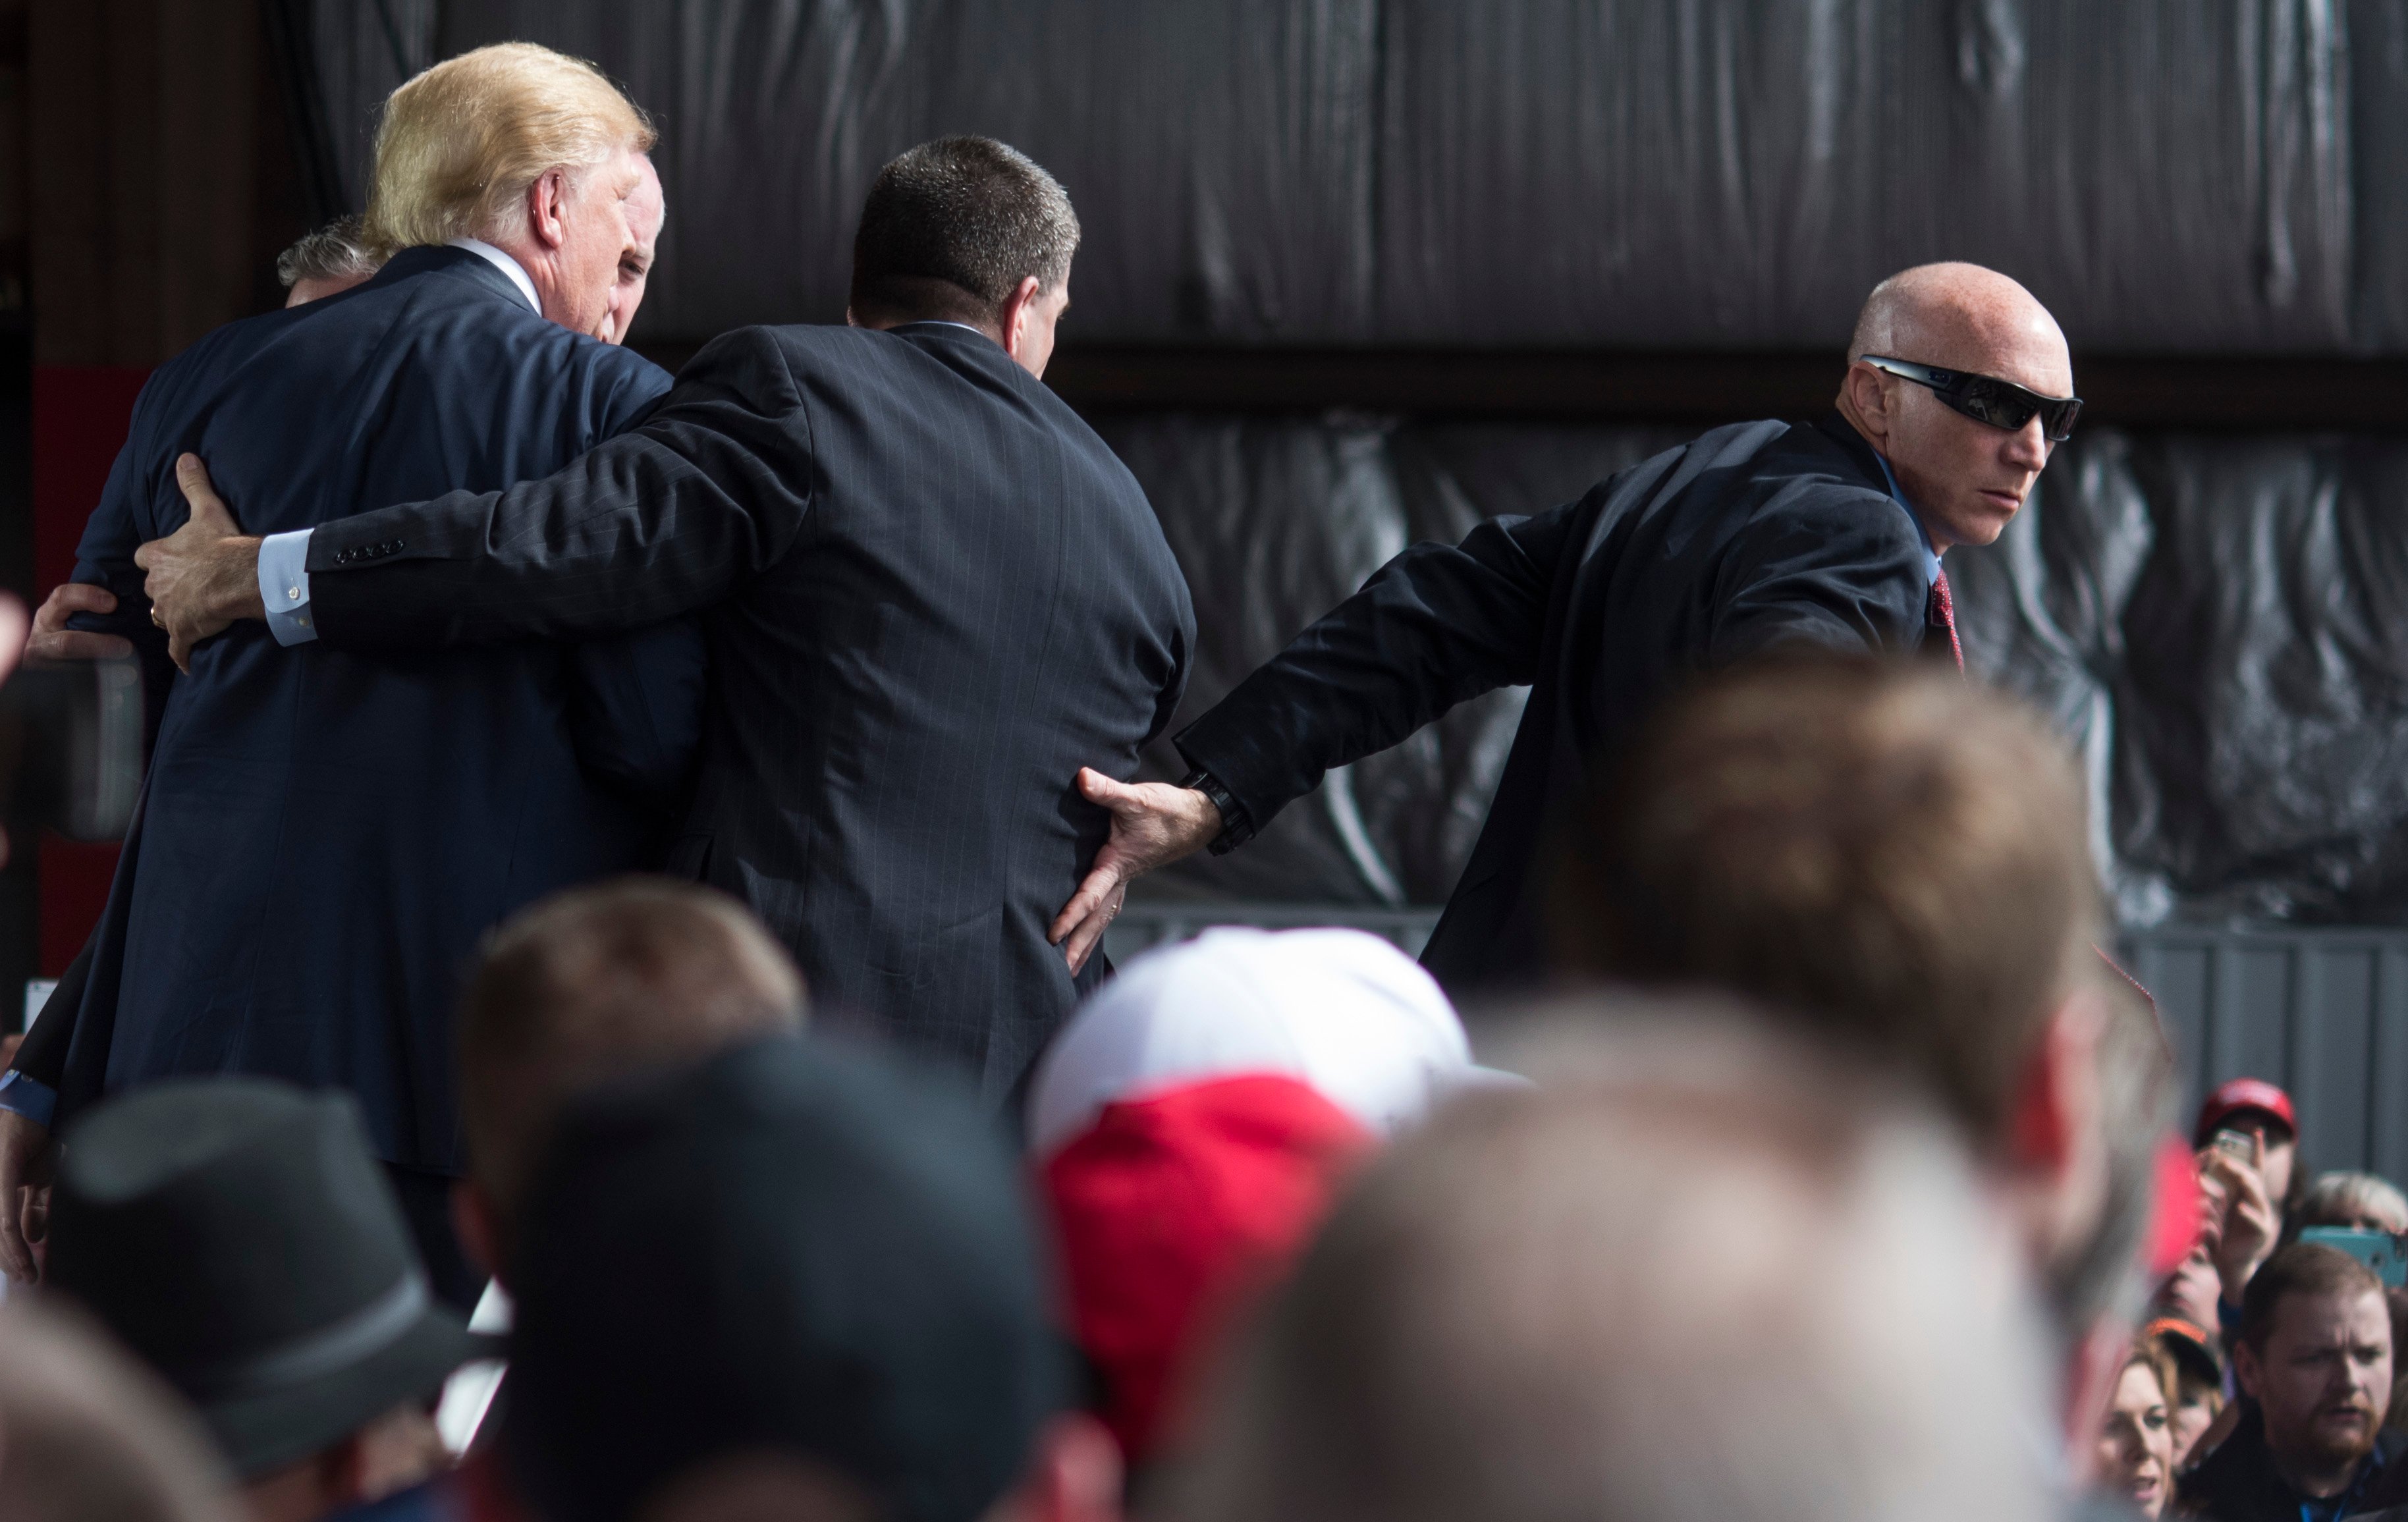 VANDALIA, OH - MARCH 12: Secret Service swarms around Republican Presidential candidate Donald Trump after a bottle was thrown on stage at a Campaign Rally on March 12, 2016 in Vandailia, Ohio. Today was the first rally after violence broke out in a Trump Rally in Chicago yesterday which canceled the rally. (Photo by Ty Wright/Getty Images)